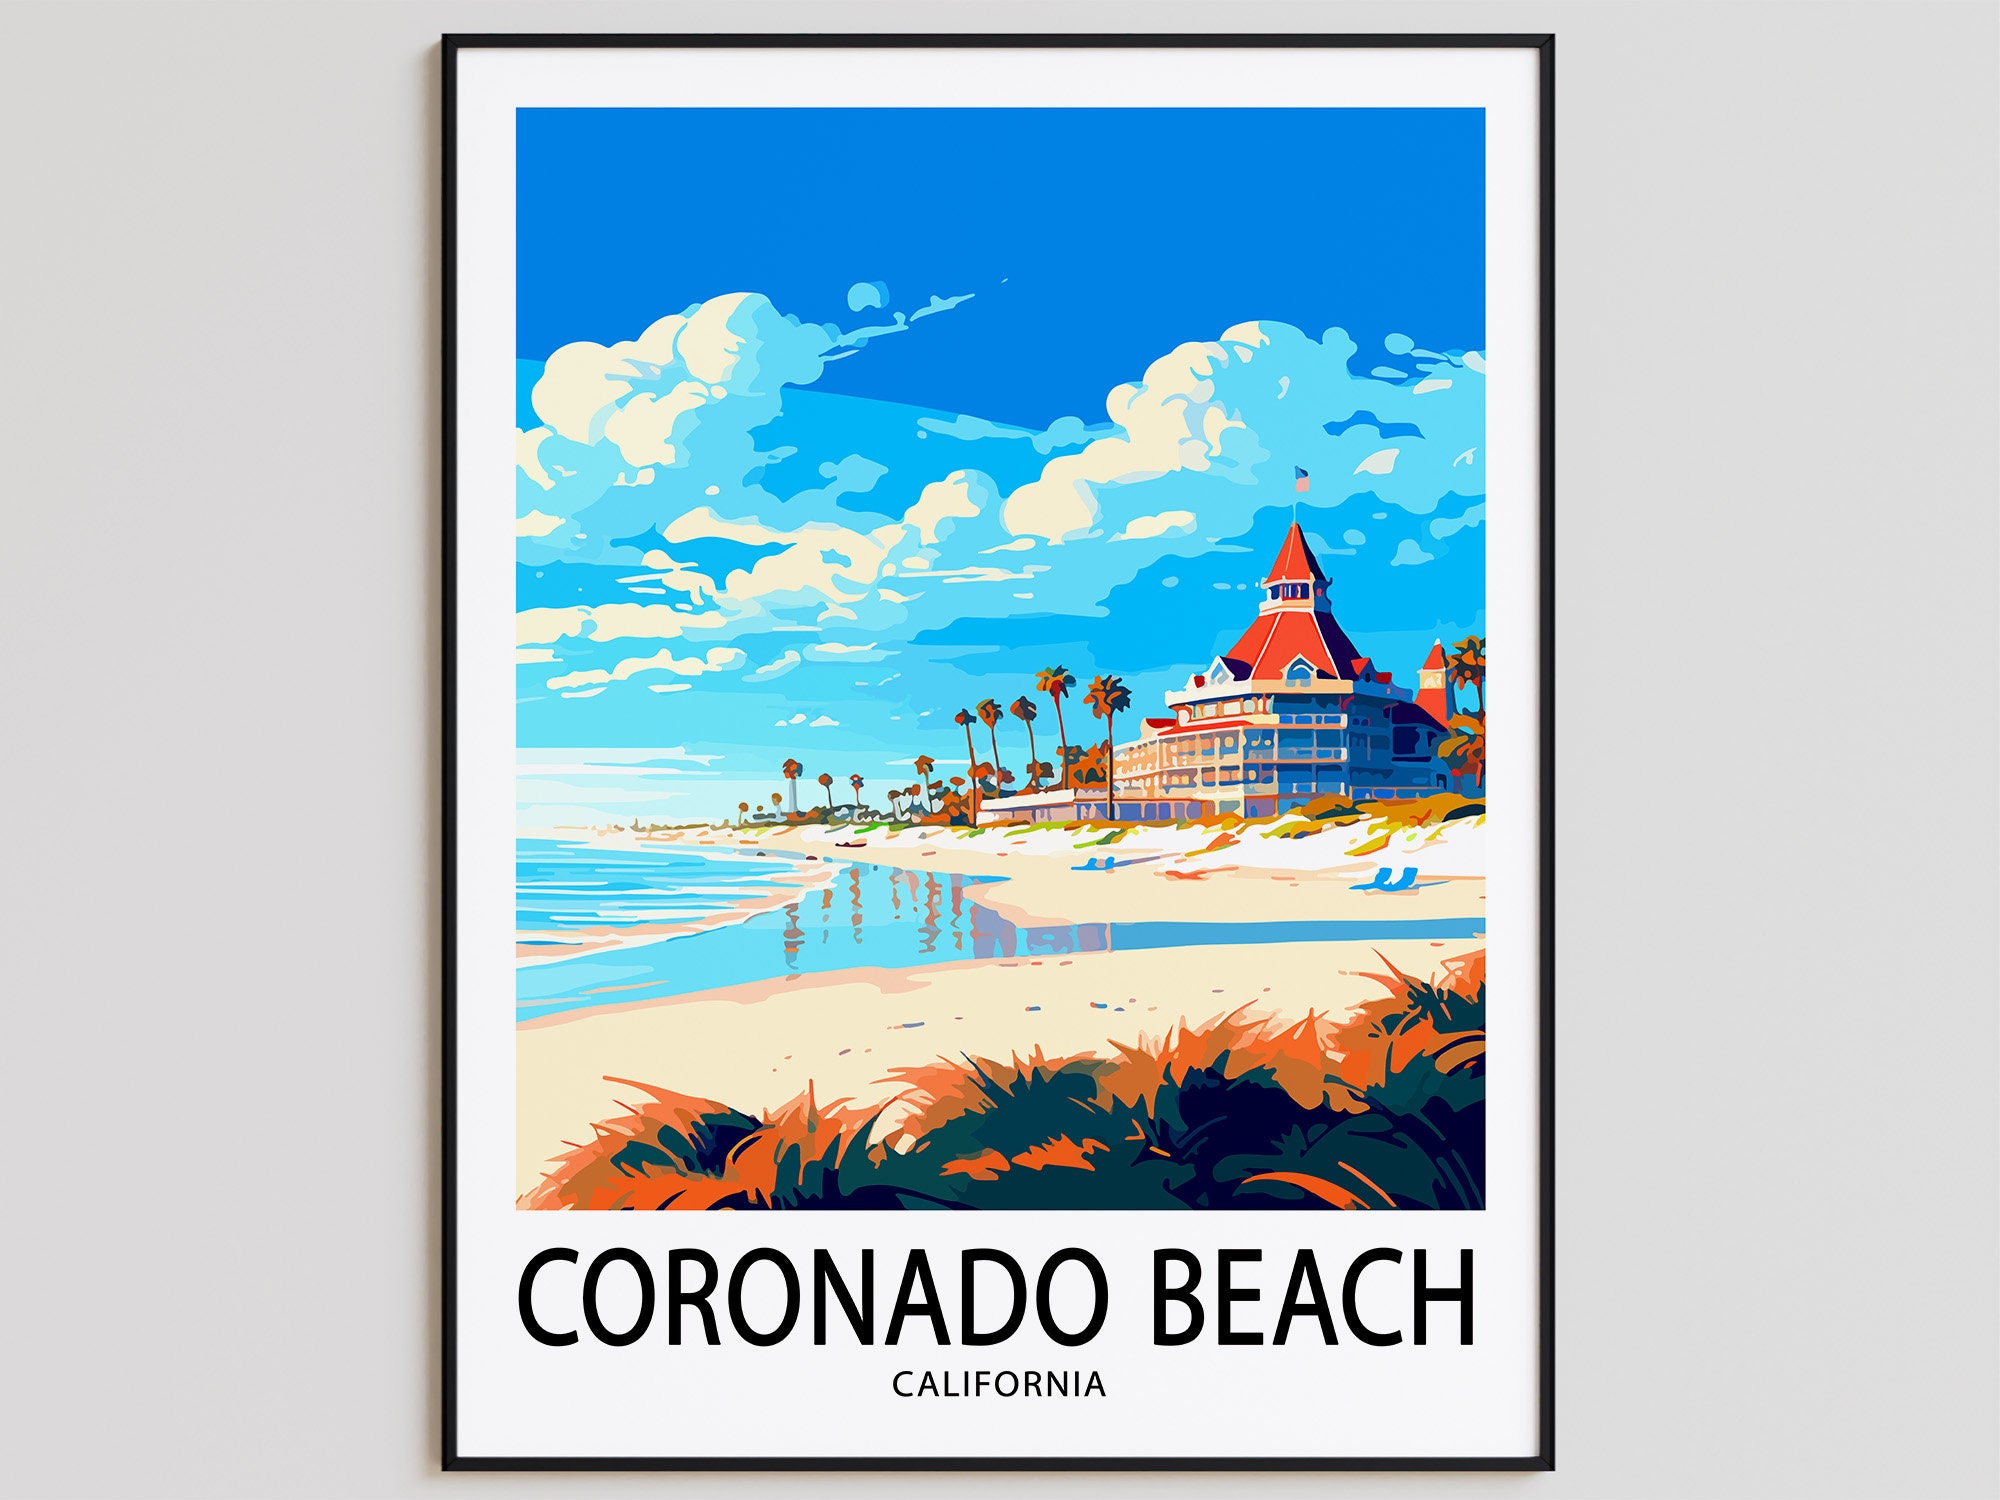 San Diego, California - Coquette on The Beach (16x24 Giclee Gallery Print, Wall Decor Travel Poster), Size: 16 x 24